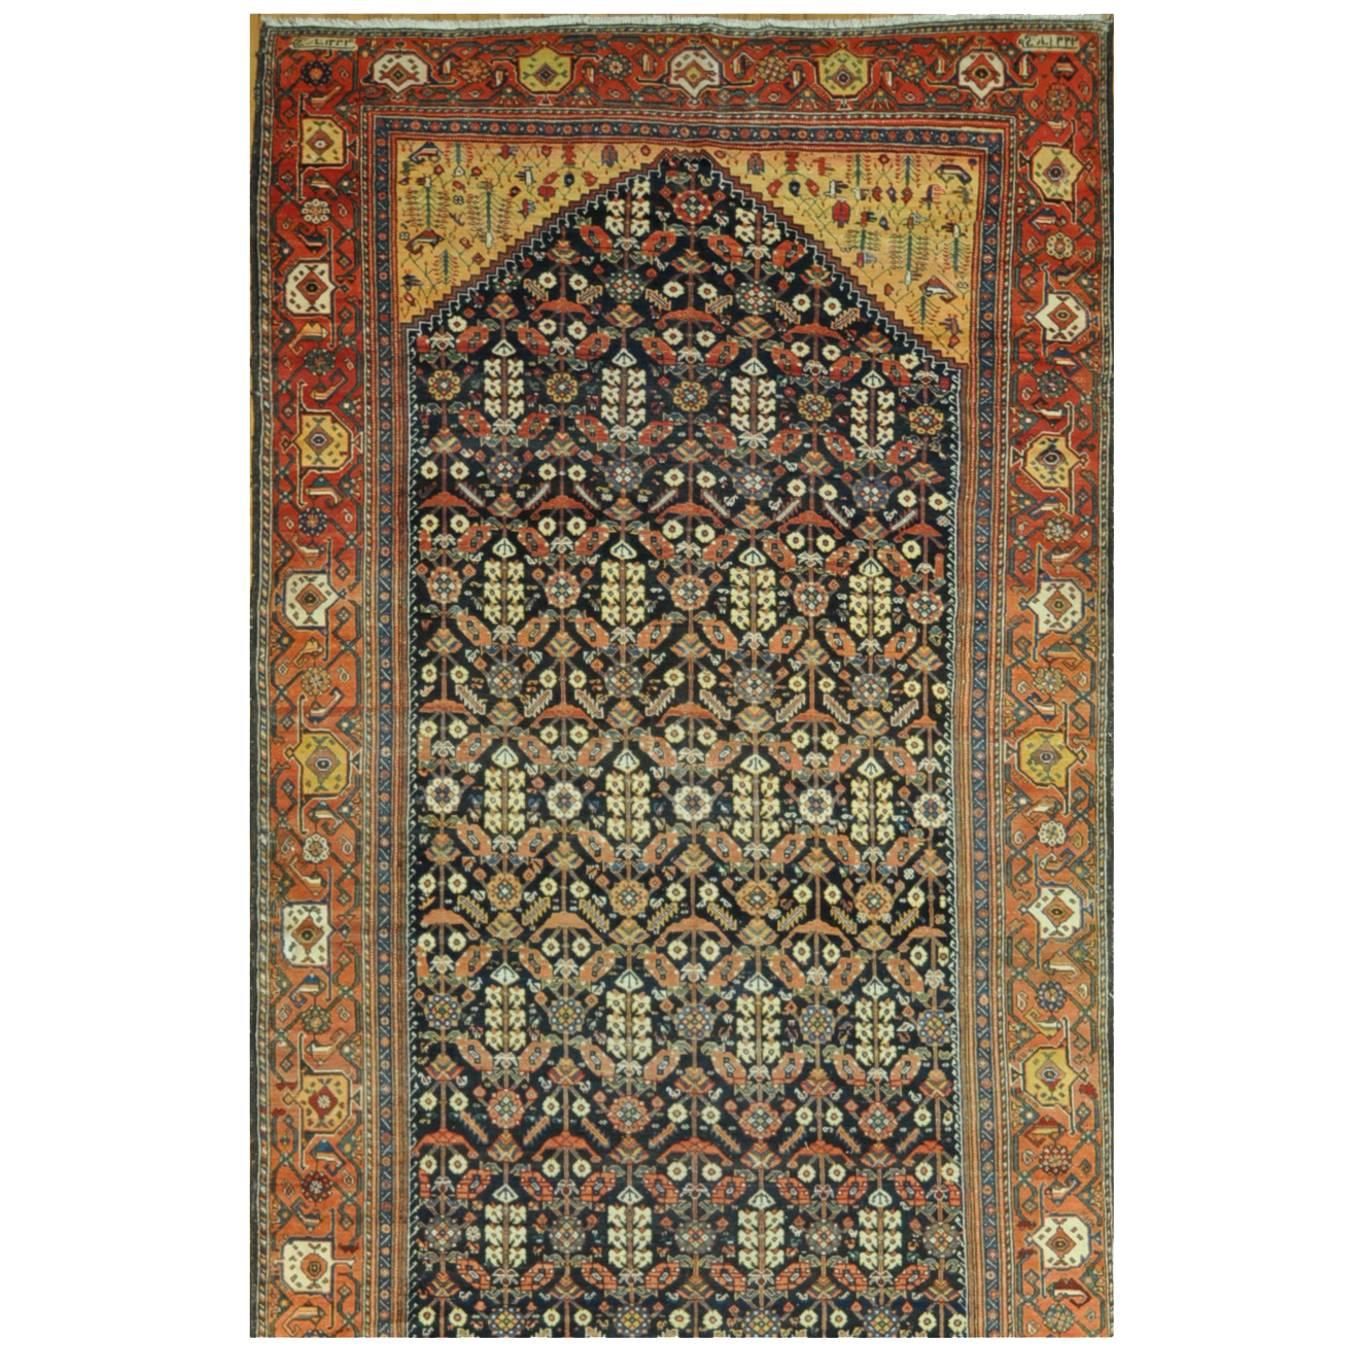 Antique Oversized Persian Bakhtiary Gallery Rug